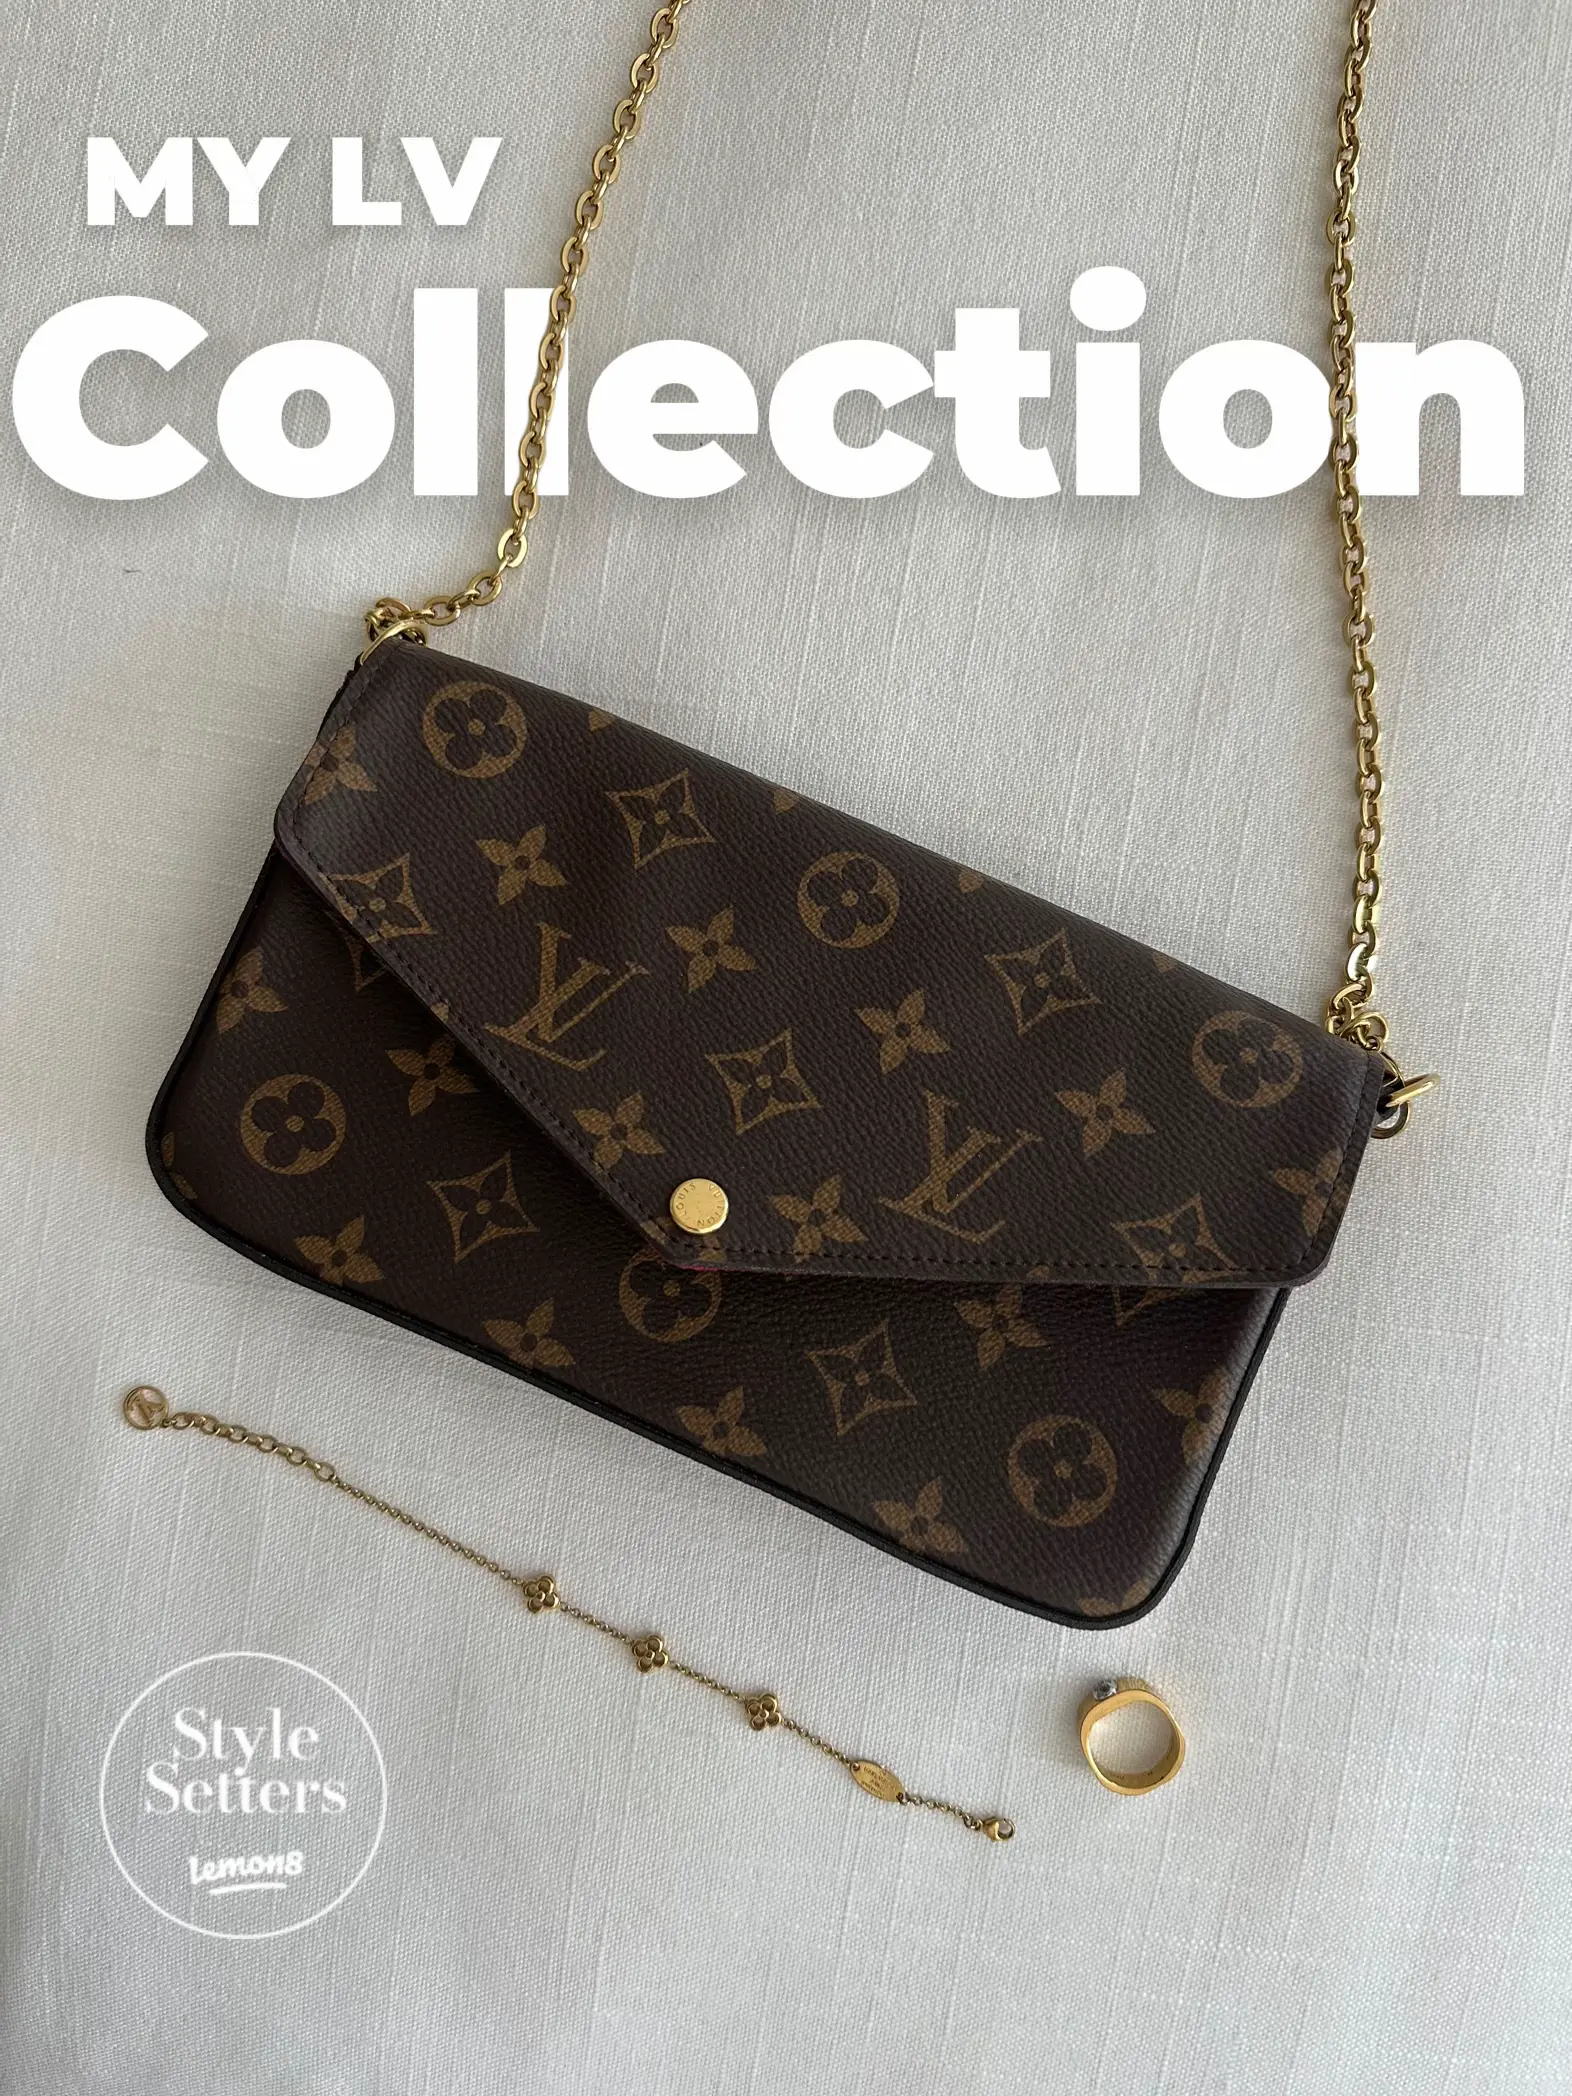 MY LV COLLECTION 🫶, Gallery posted by katie rae